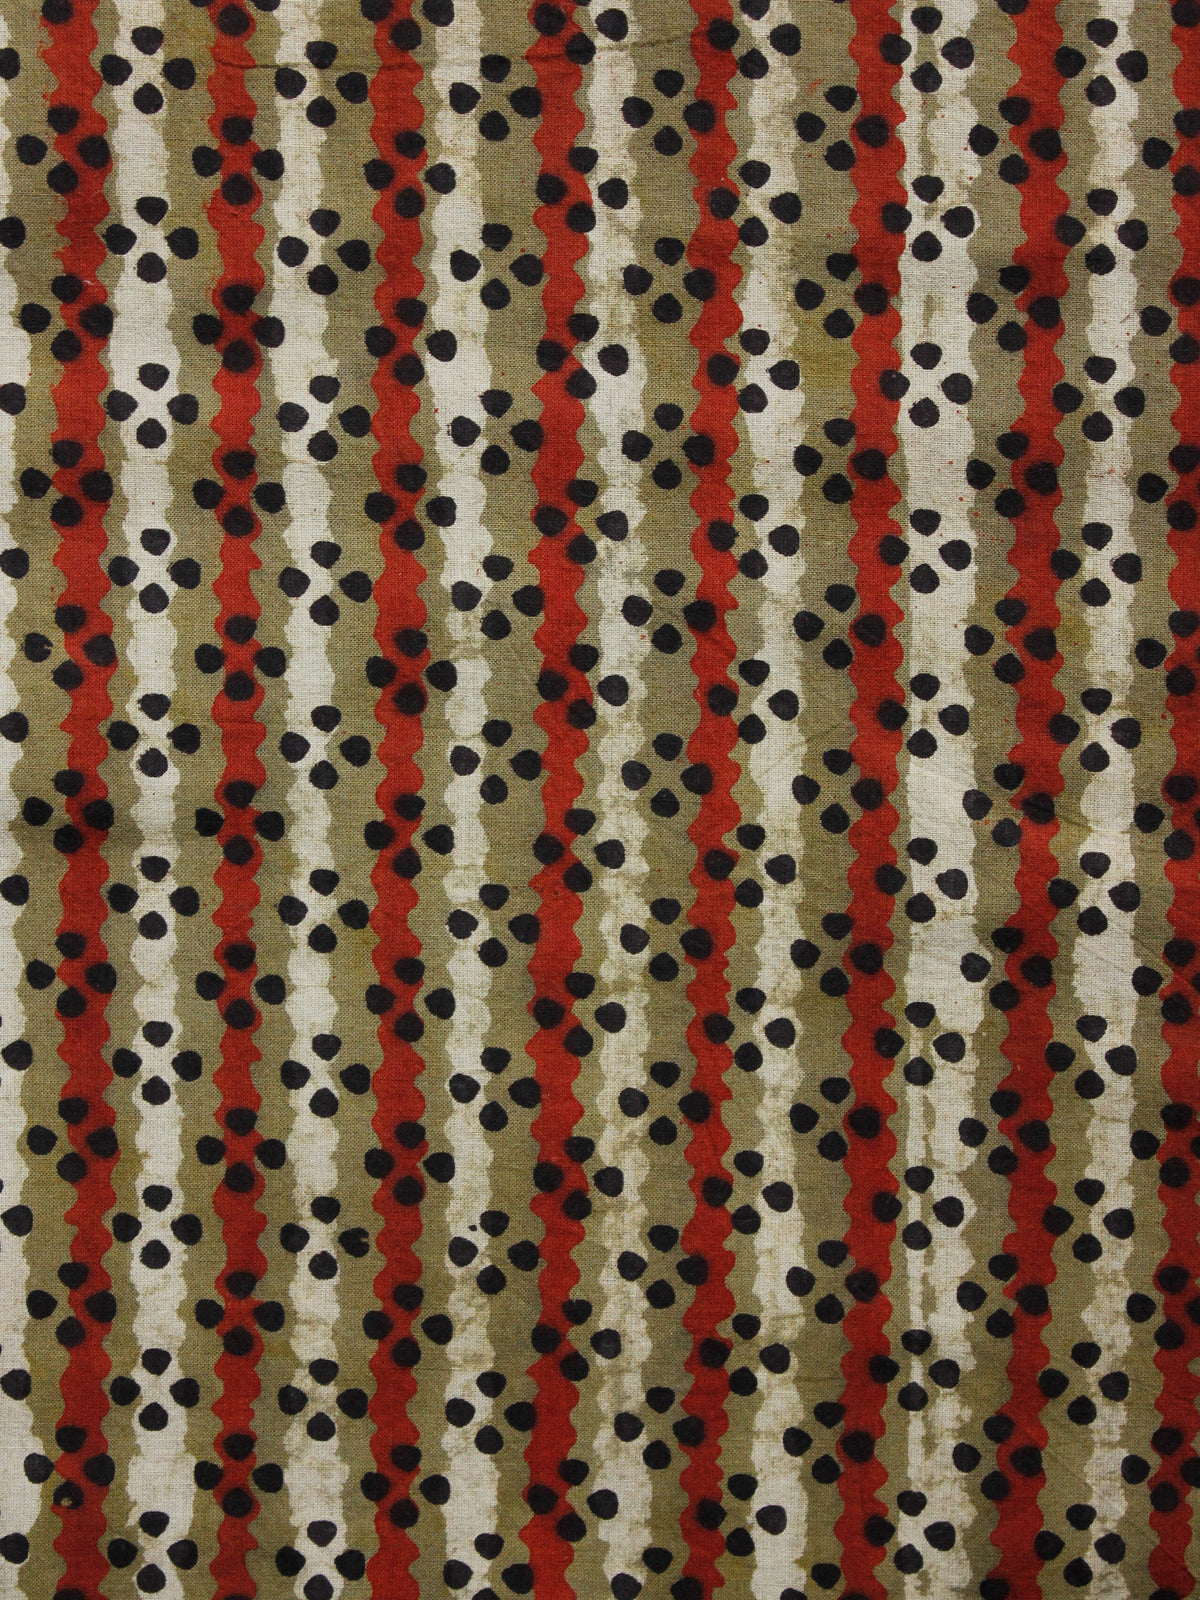 Olive Green Red Black Hand Block Printed Cotton Fabric Per Meter - F001F1353